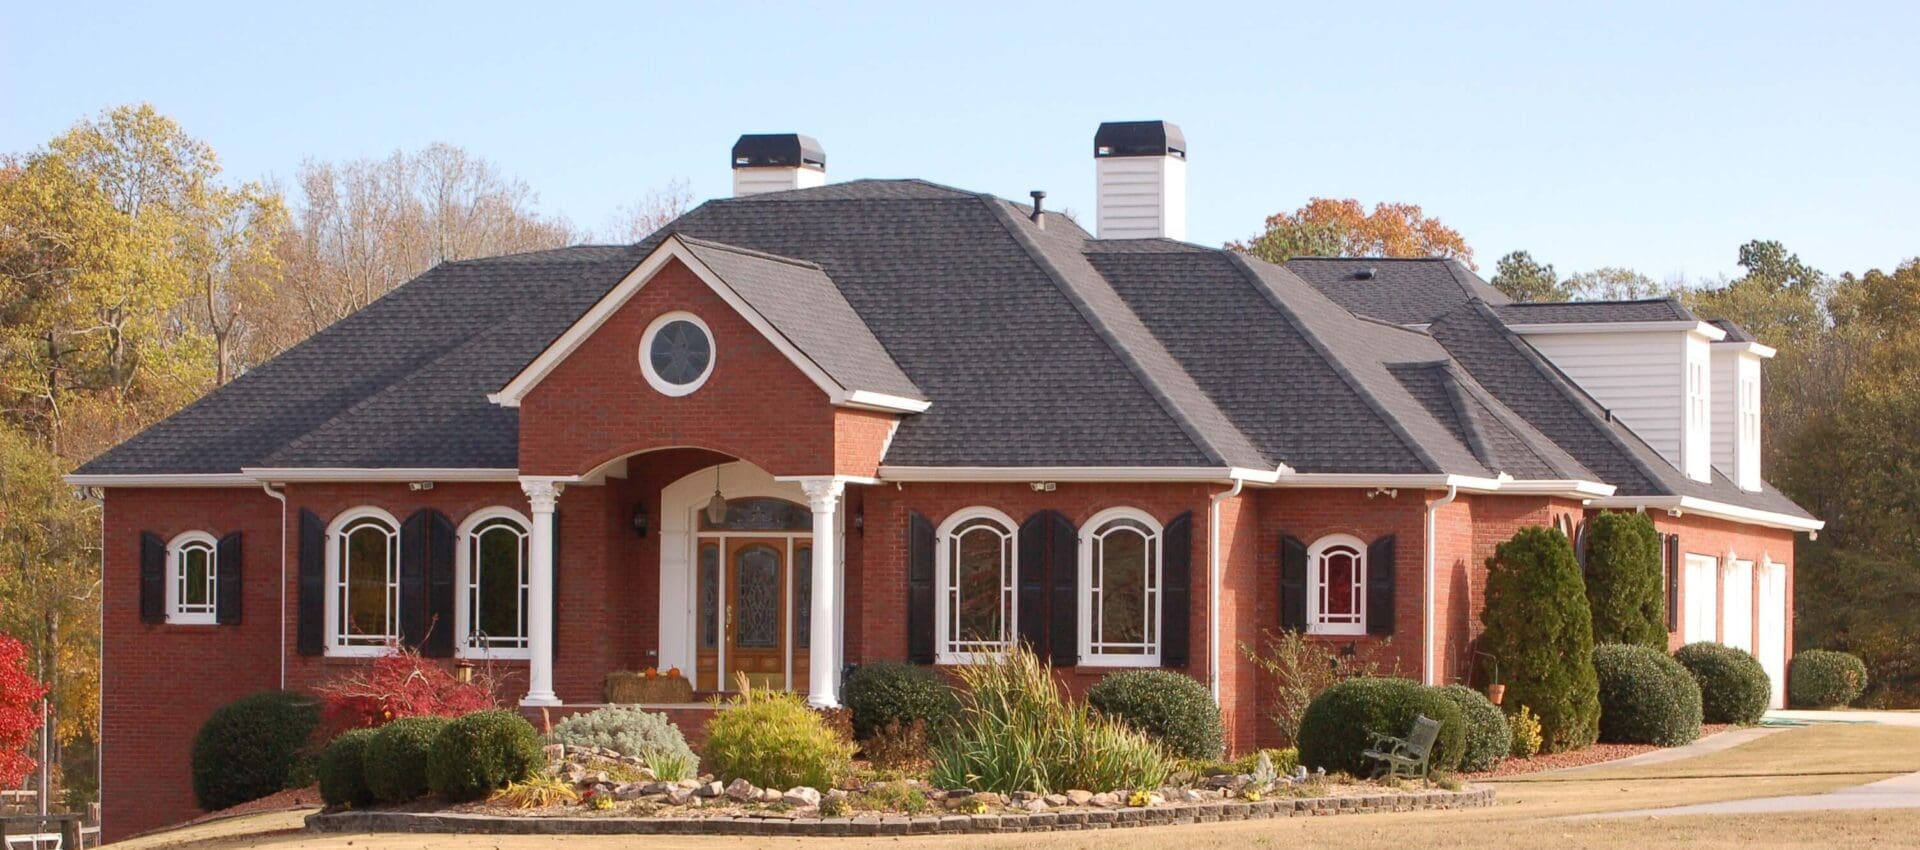 A red brick house with black roof and white trim.